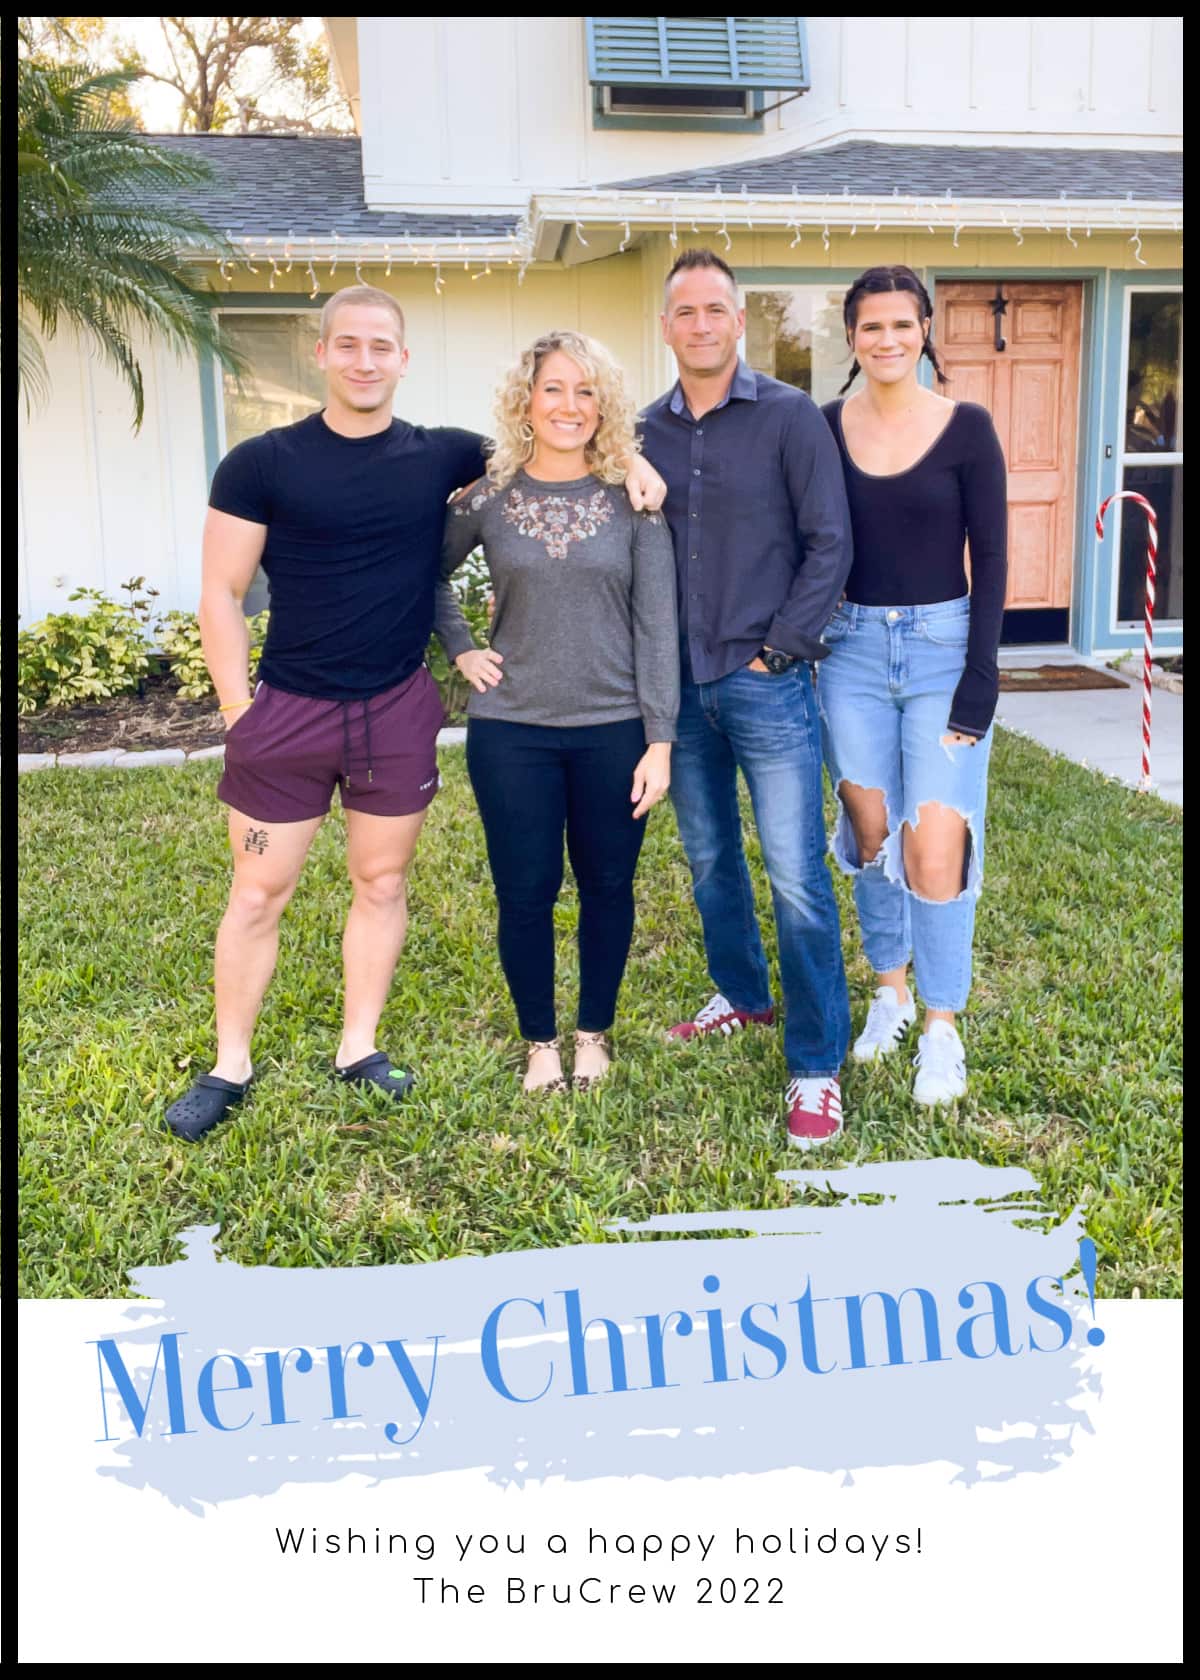 Family Christmas card picture with text.